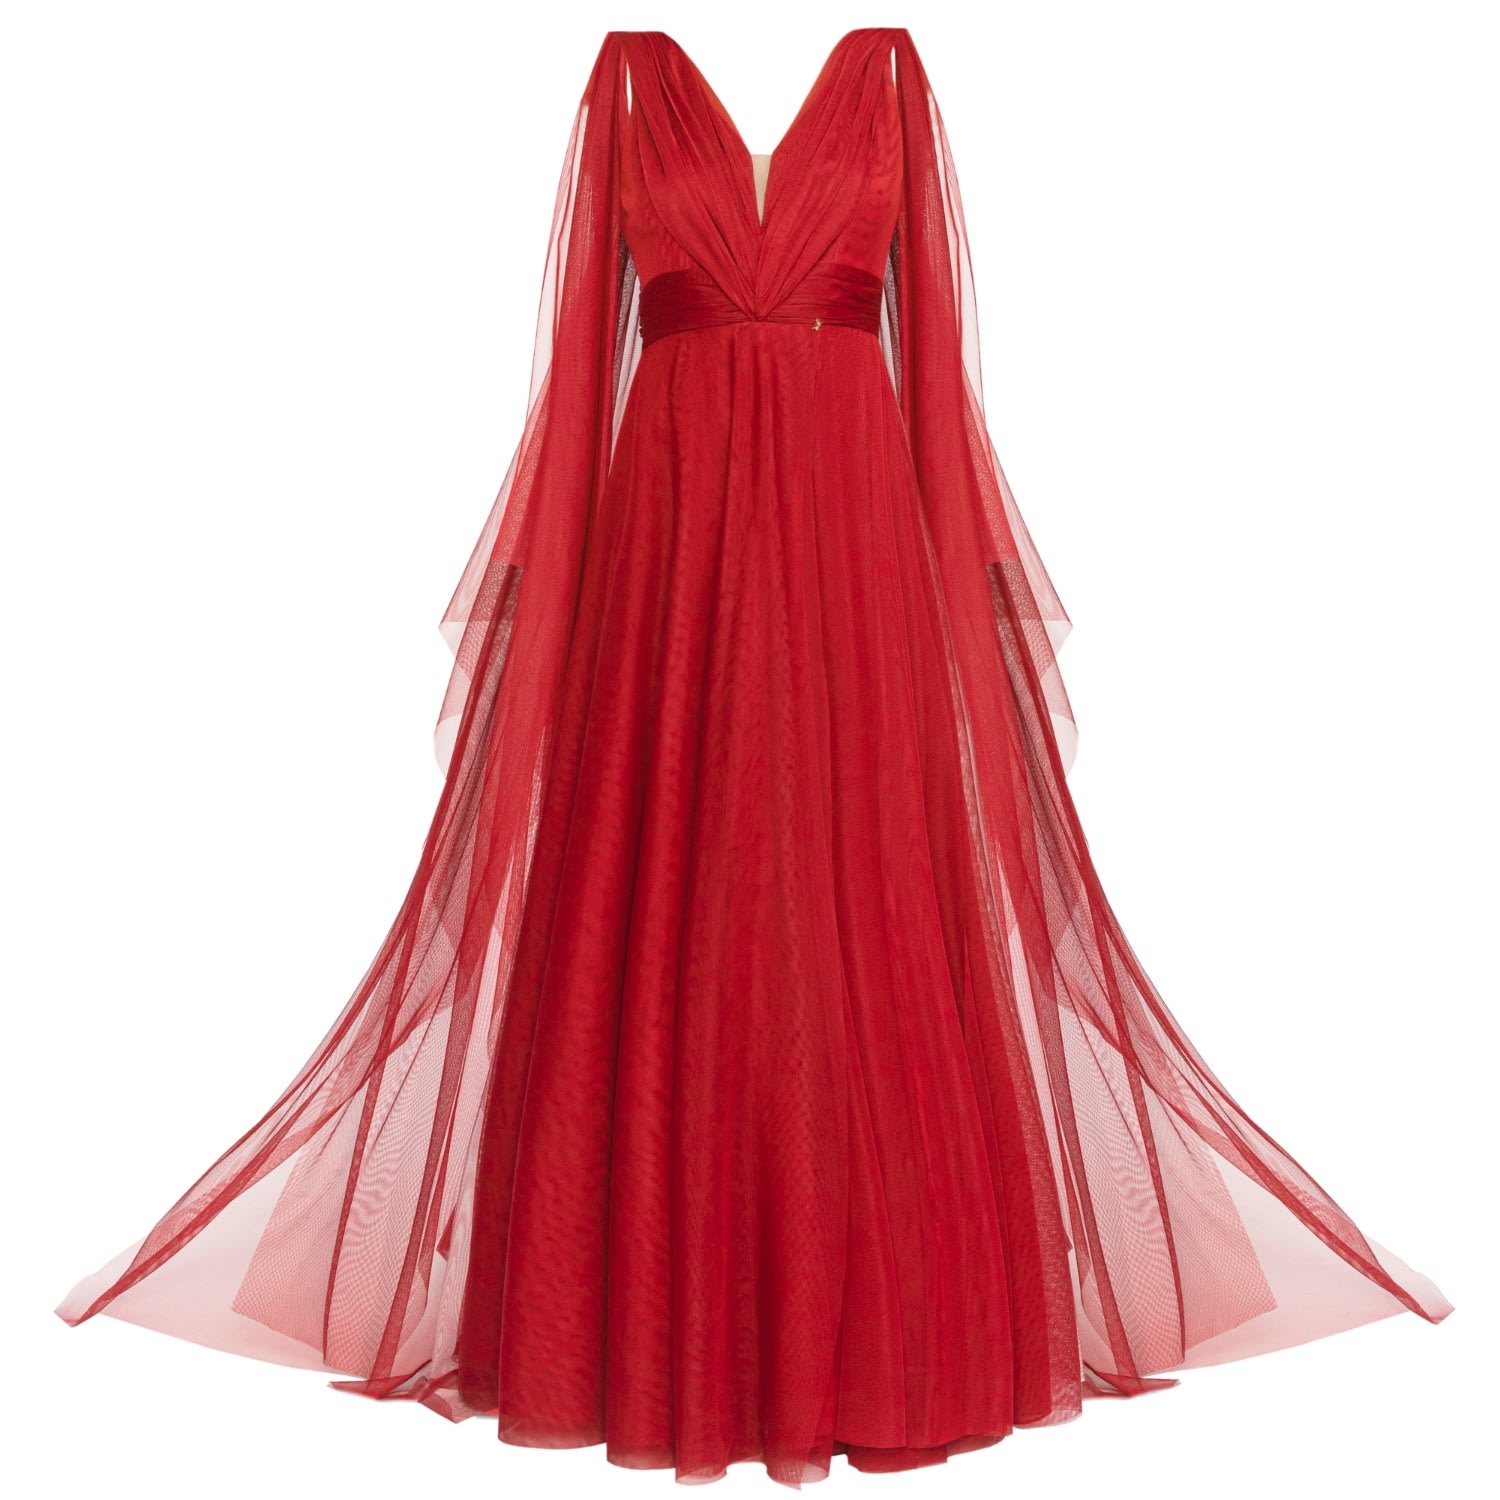 Angelika Jozefczyk Women's Terracotta Tulle Evening Gown Red